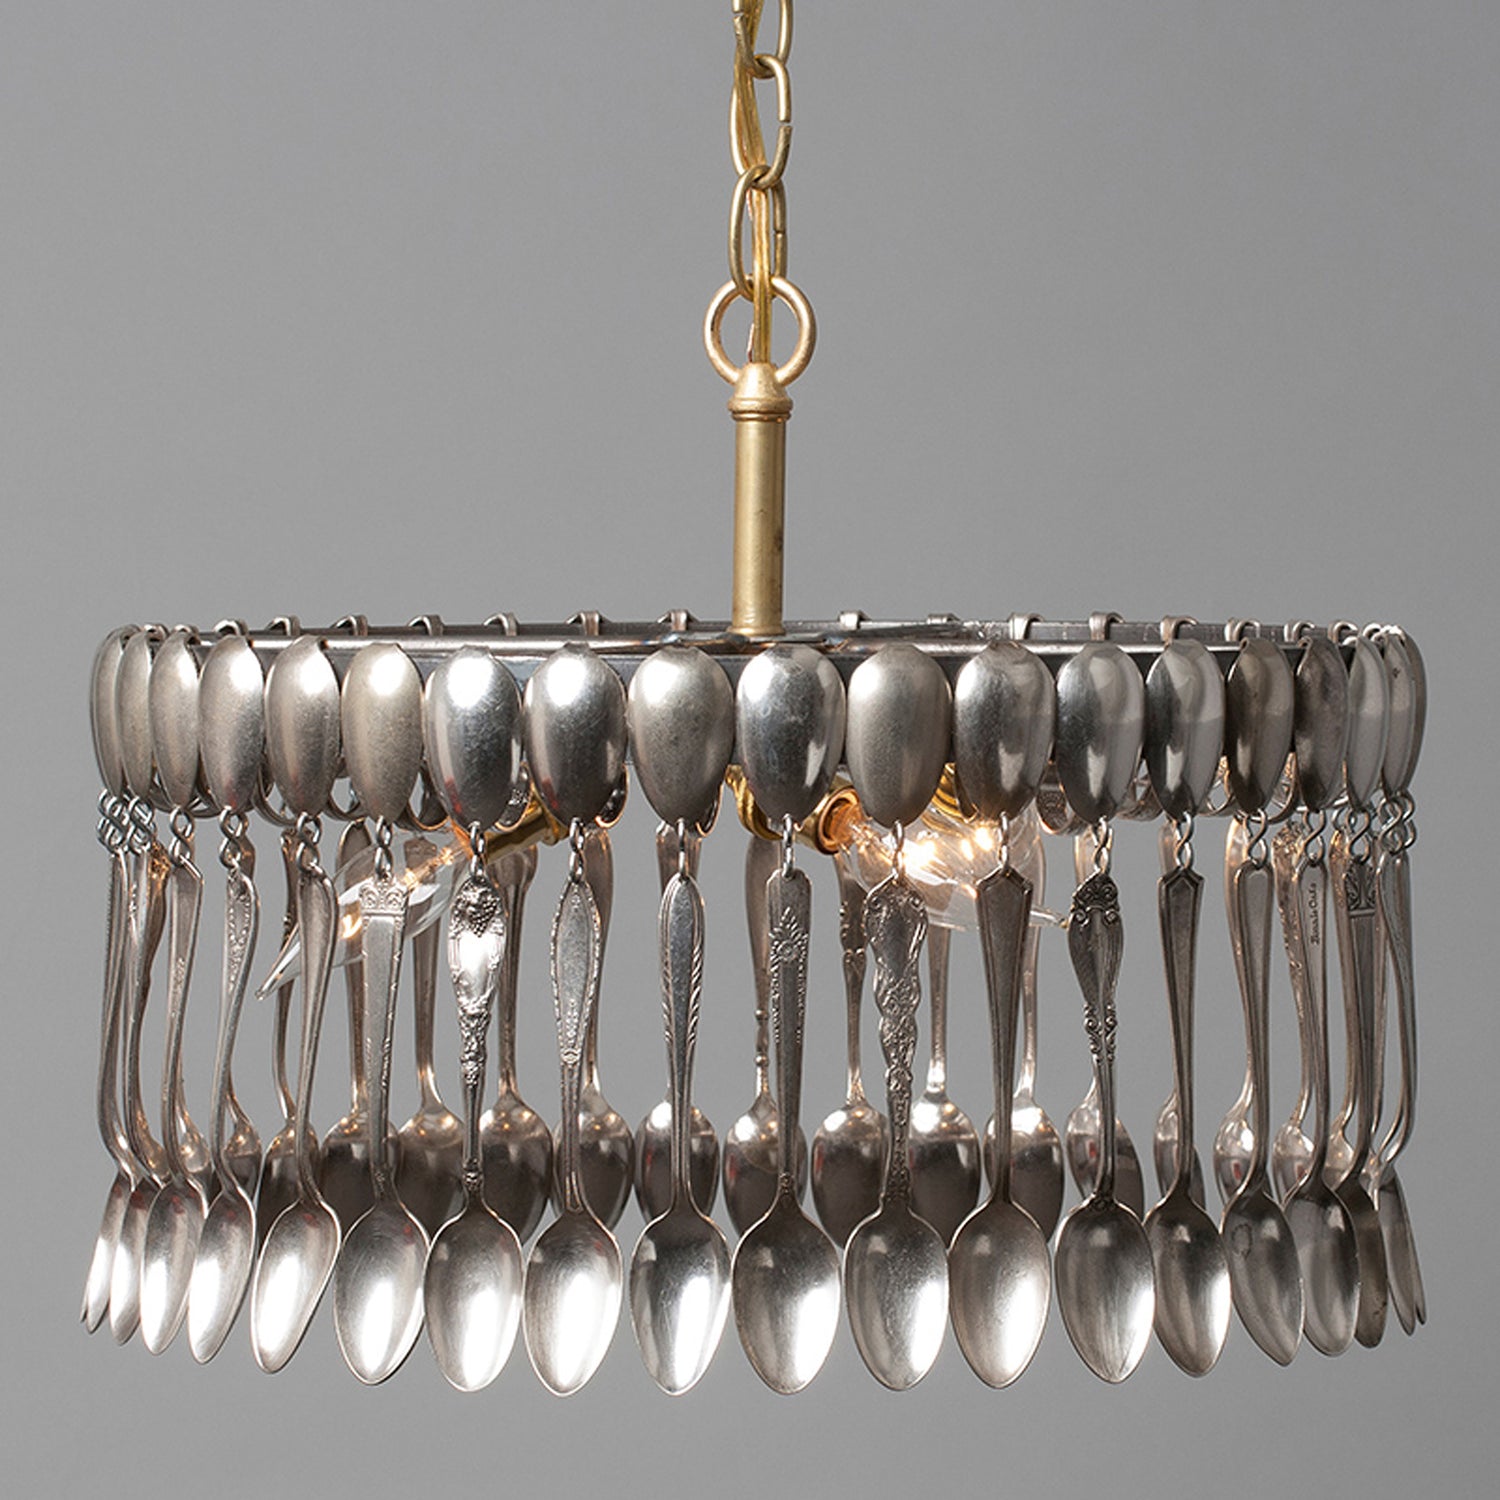 A hand-crafted Spoon Pendant Light made of vintage spoons hanging from a chain by Hester &amp; Cook.